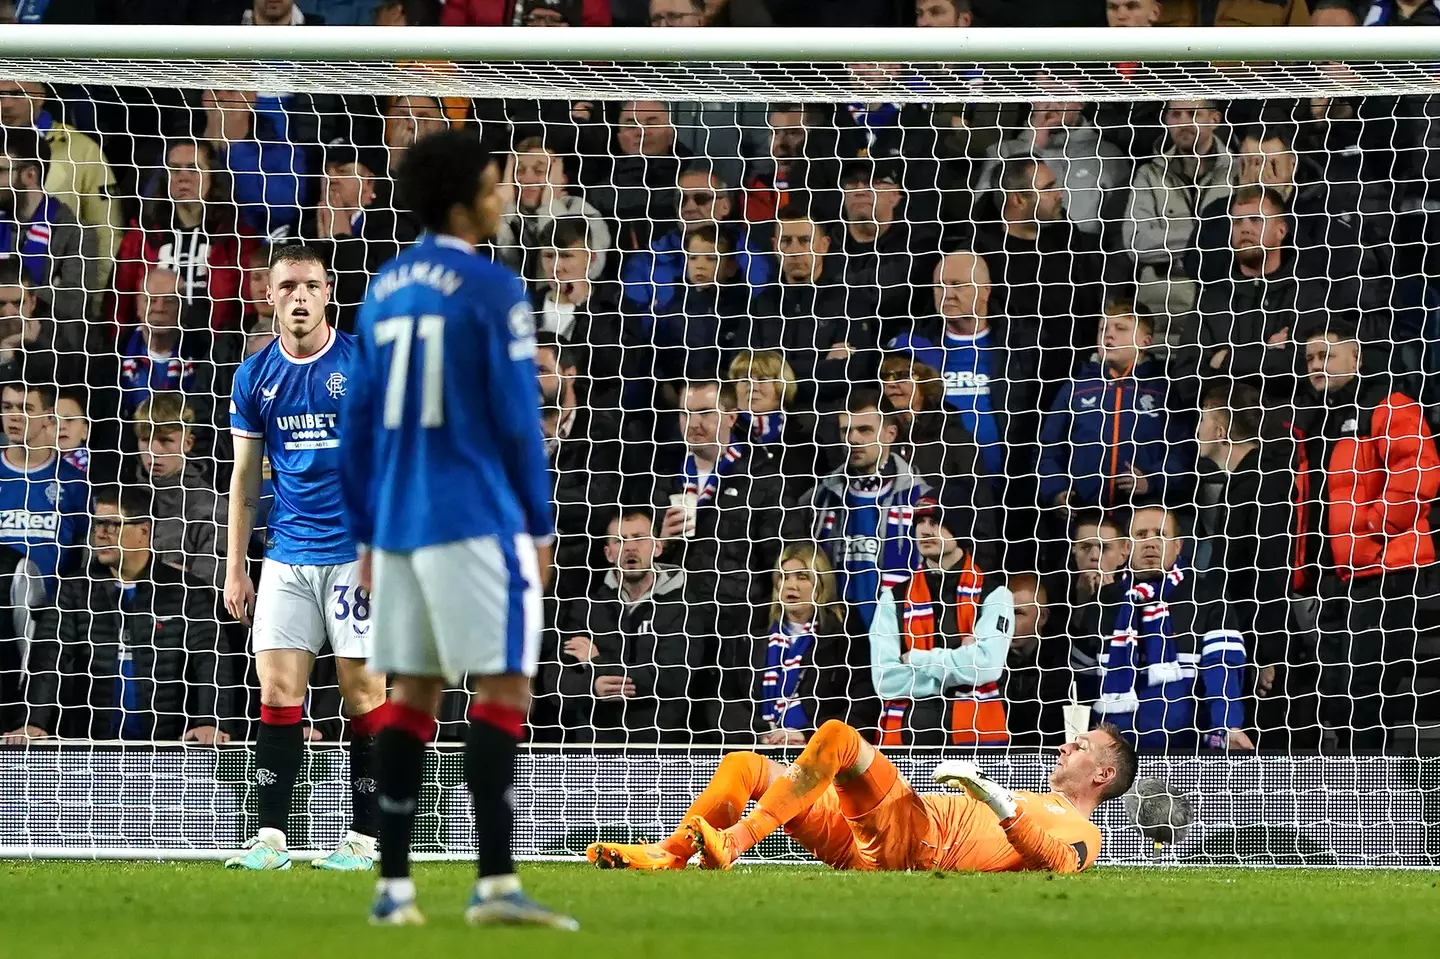 Rangers players looked distraught on Tuesday. (Image